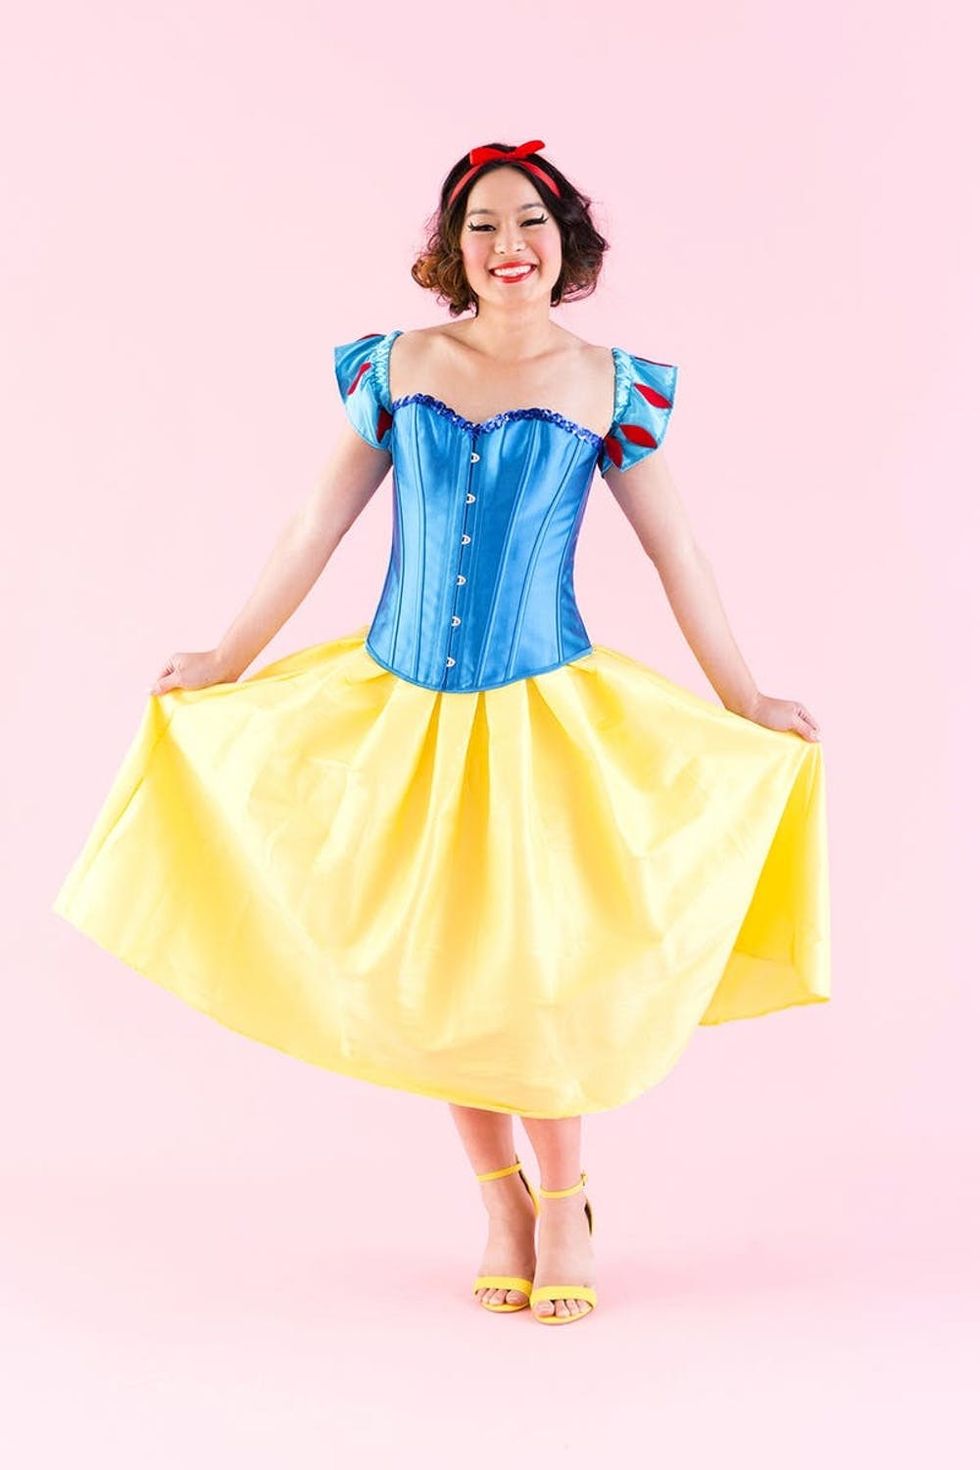 How To Diy The Classic Snow White Costume For Halloween Brit Co 